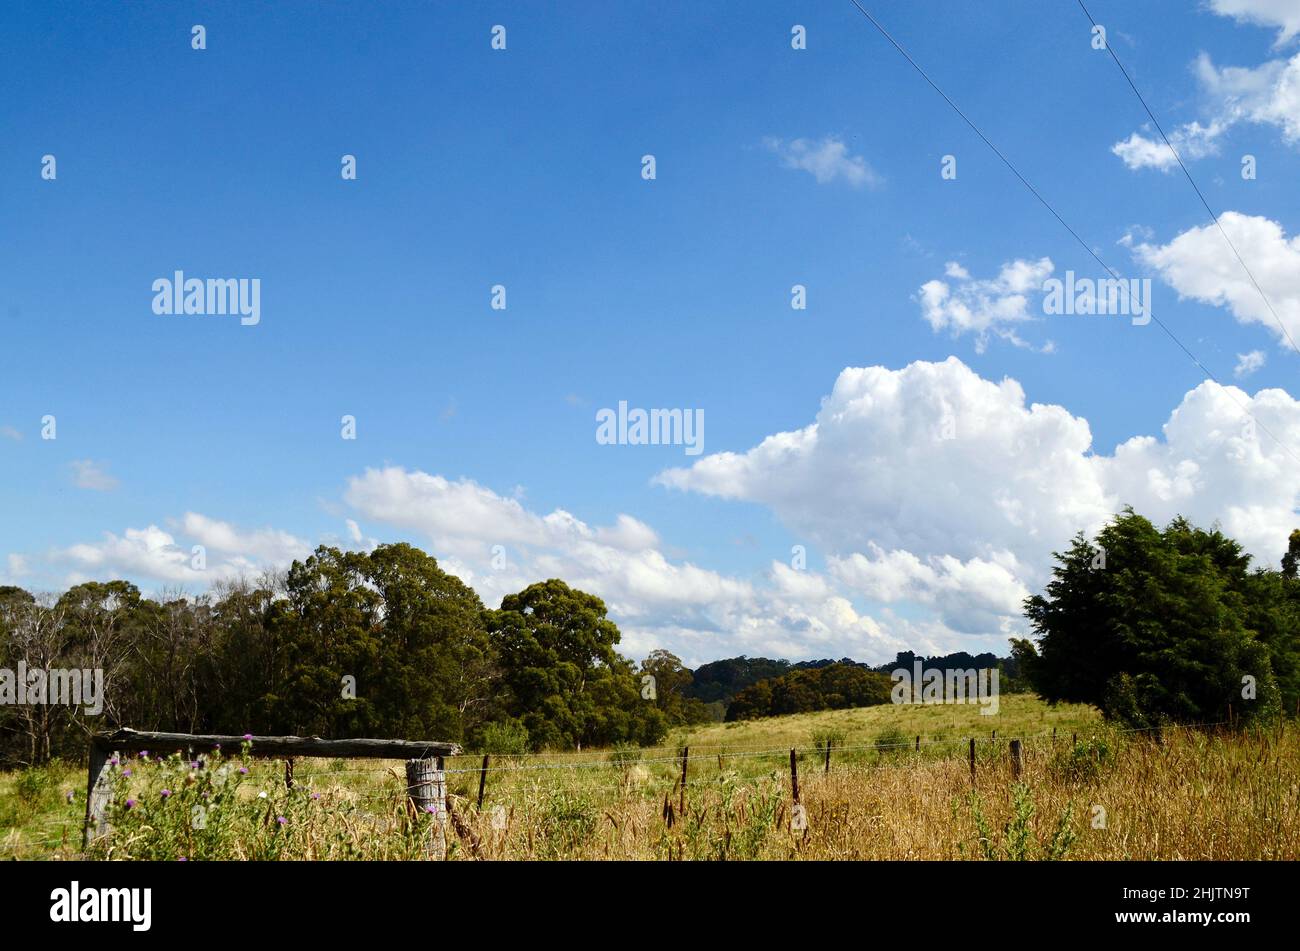 A field in rural New South Wales, Australia Stock Photo